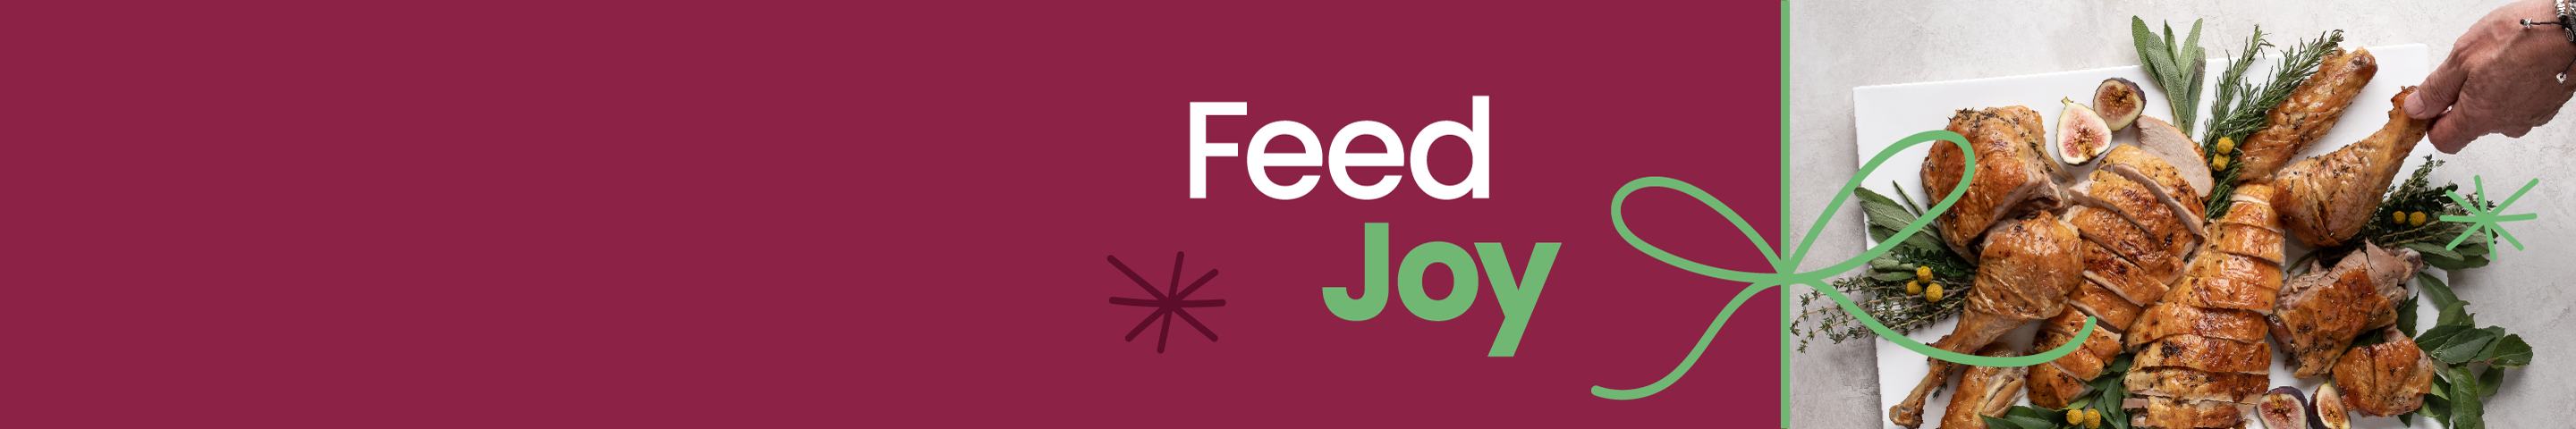 Text that says "Feed Joy" next to an image of a Prime Rib Roast.